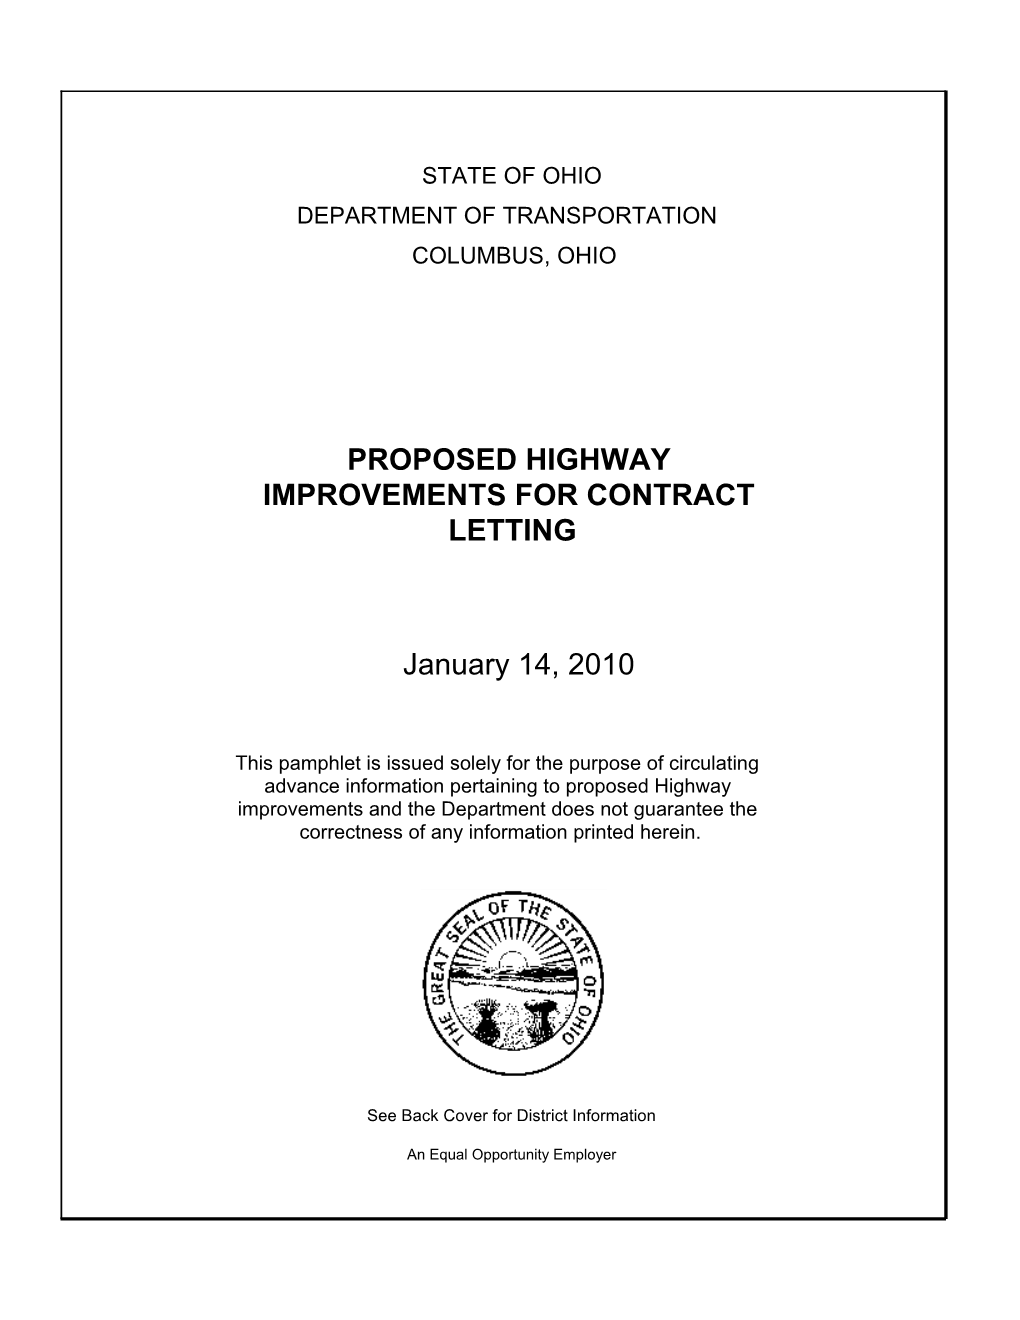 Proposed Highway Improvements for Contract Letting